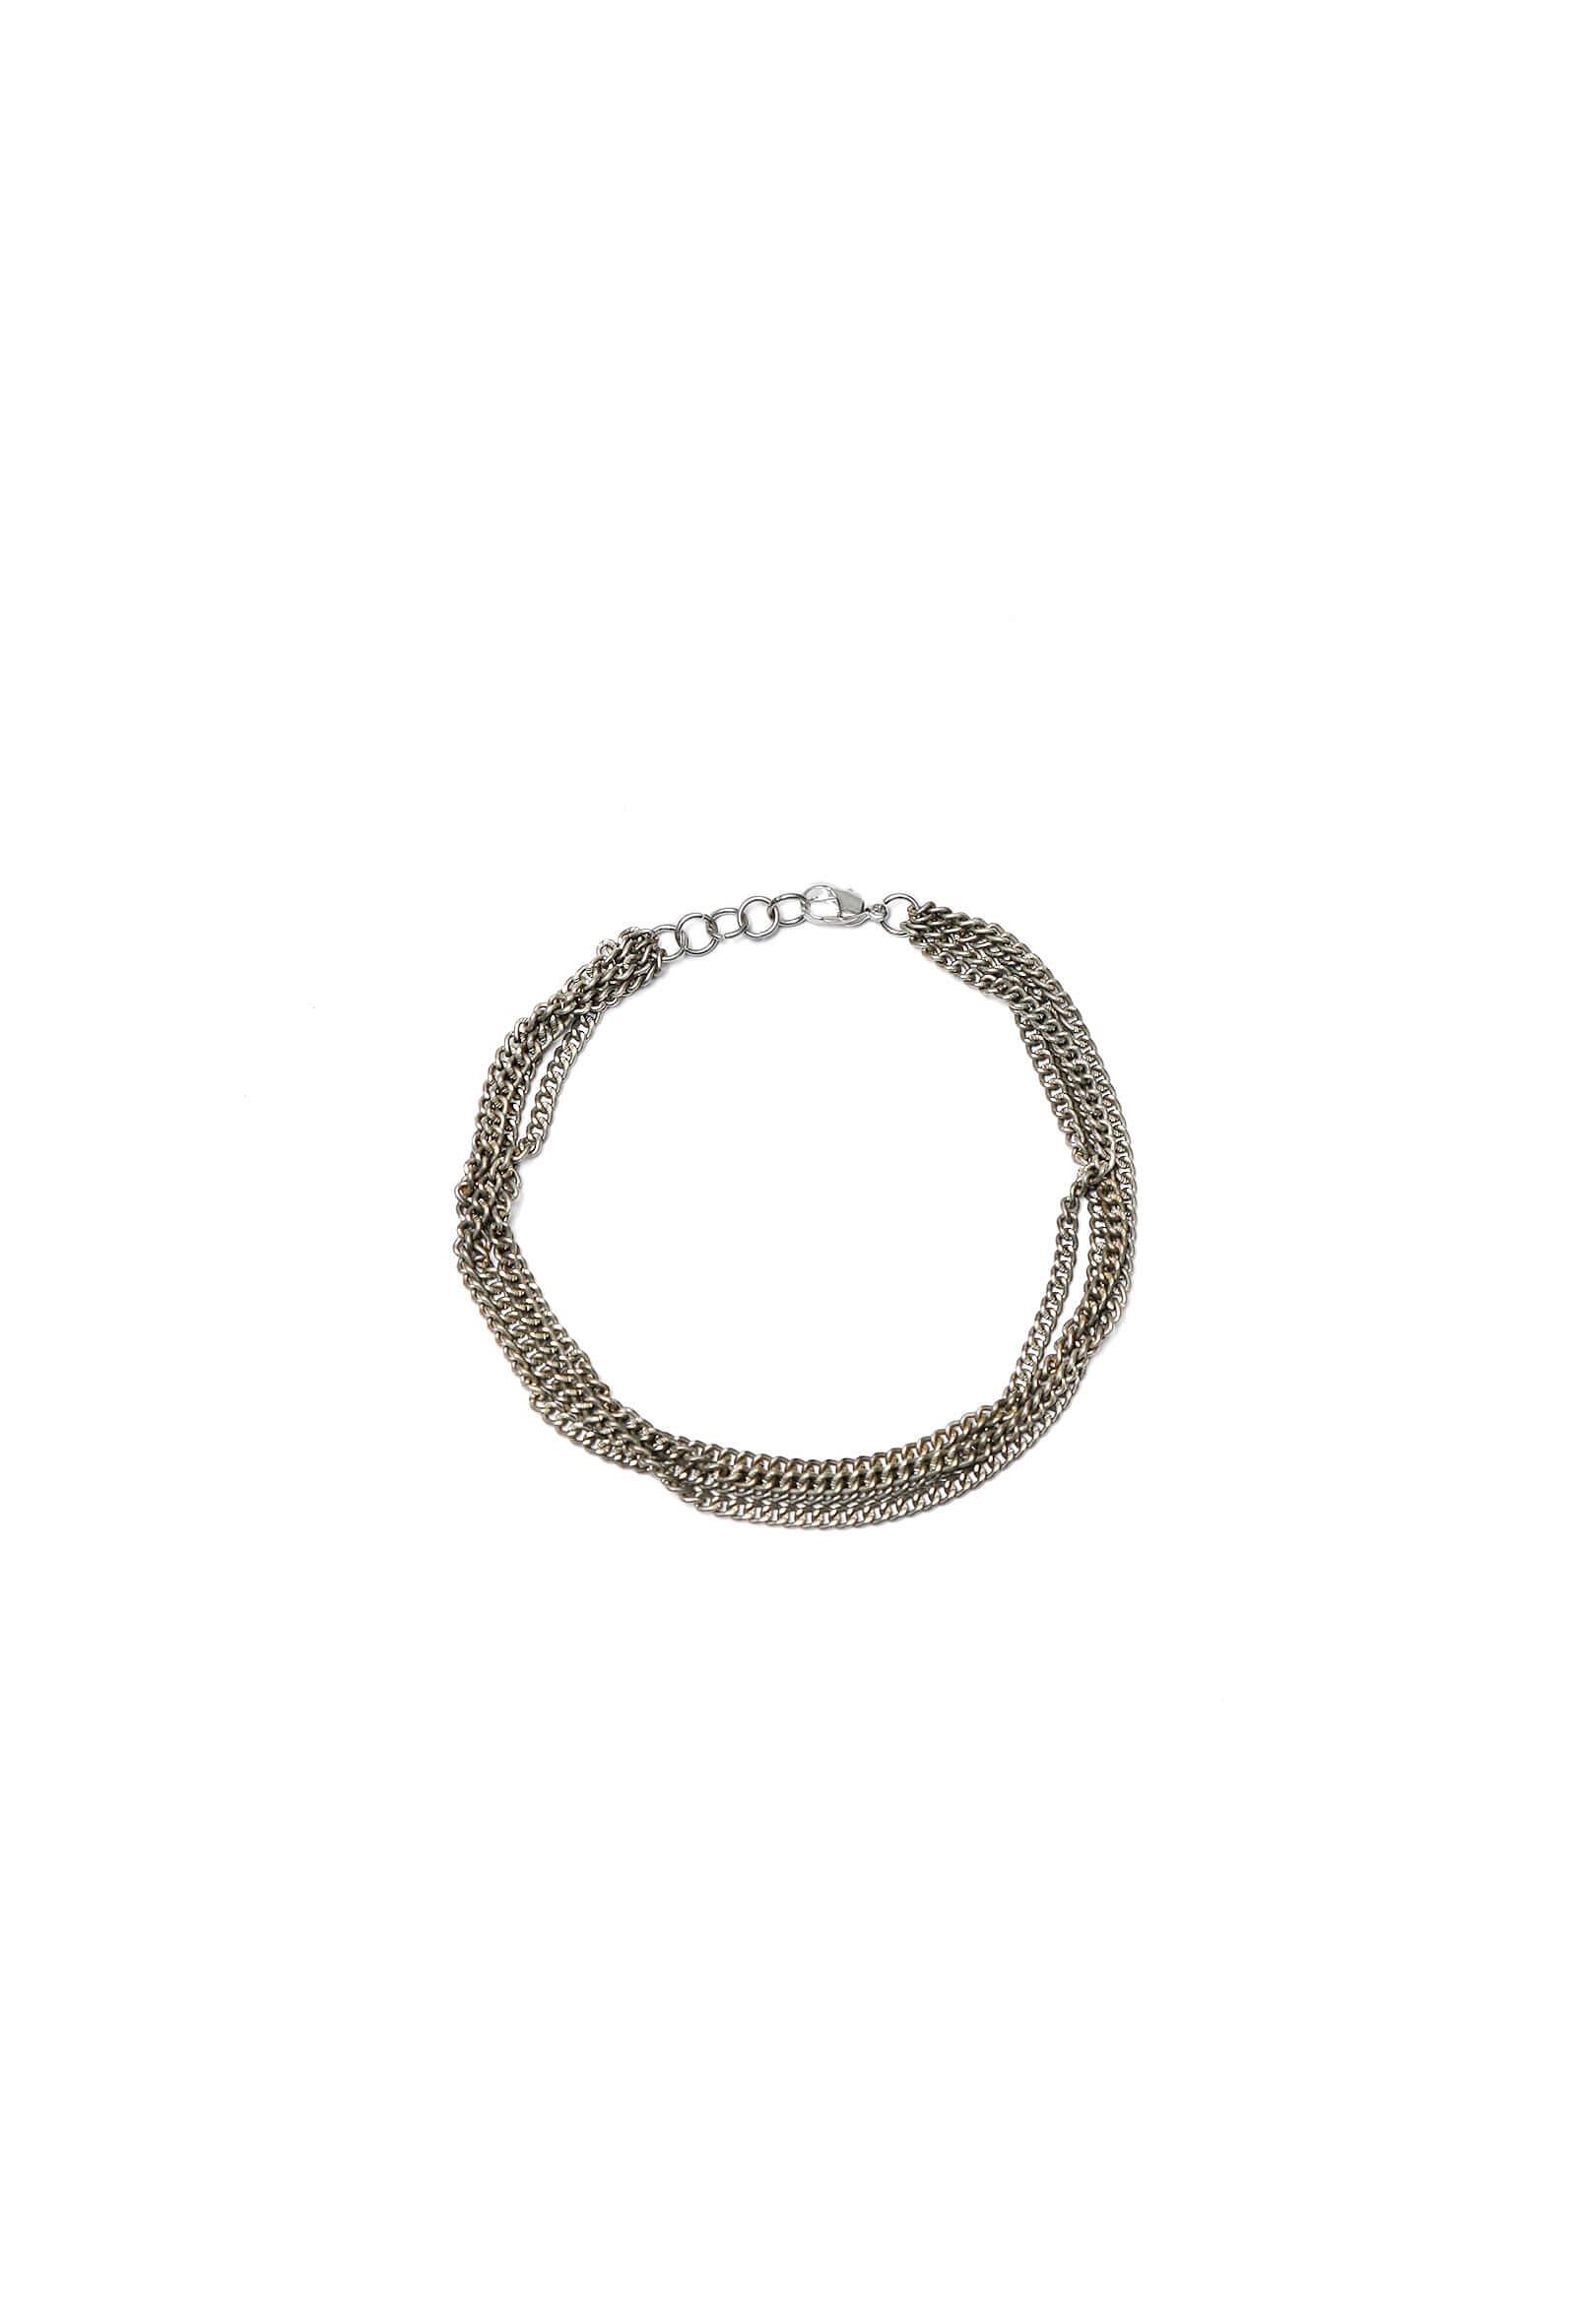 Multi-Layered silver plated brass Anklet With Antique finish